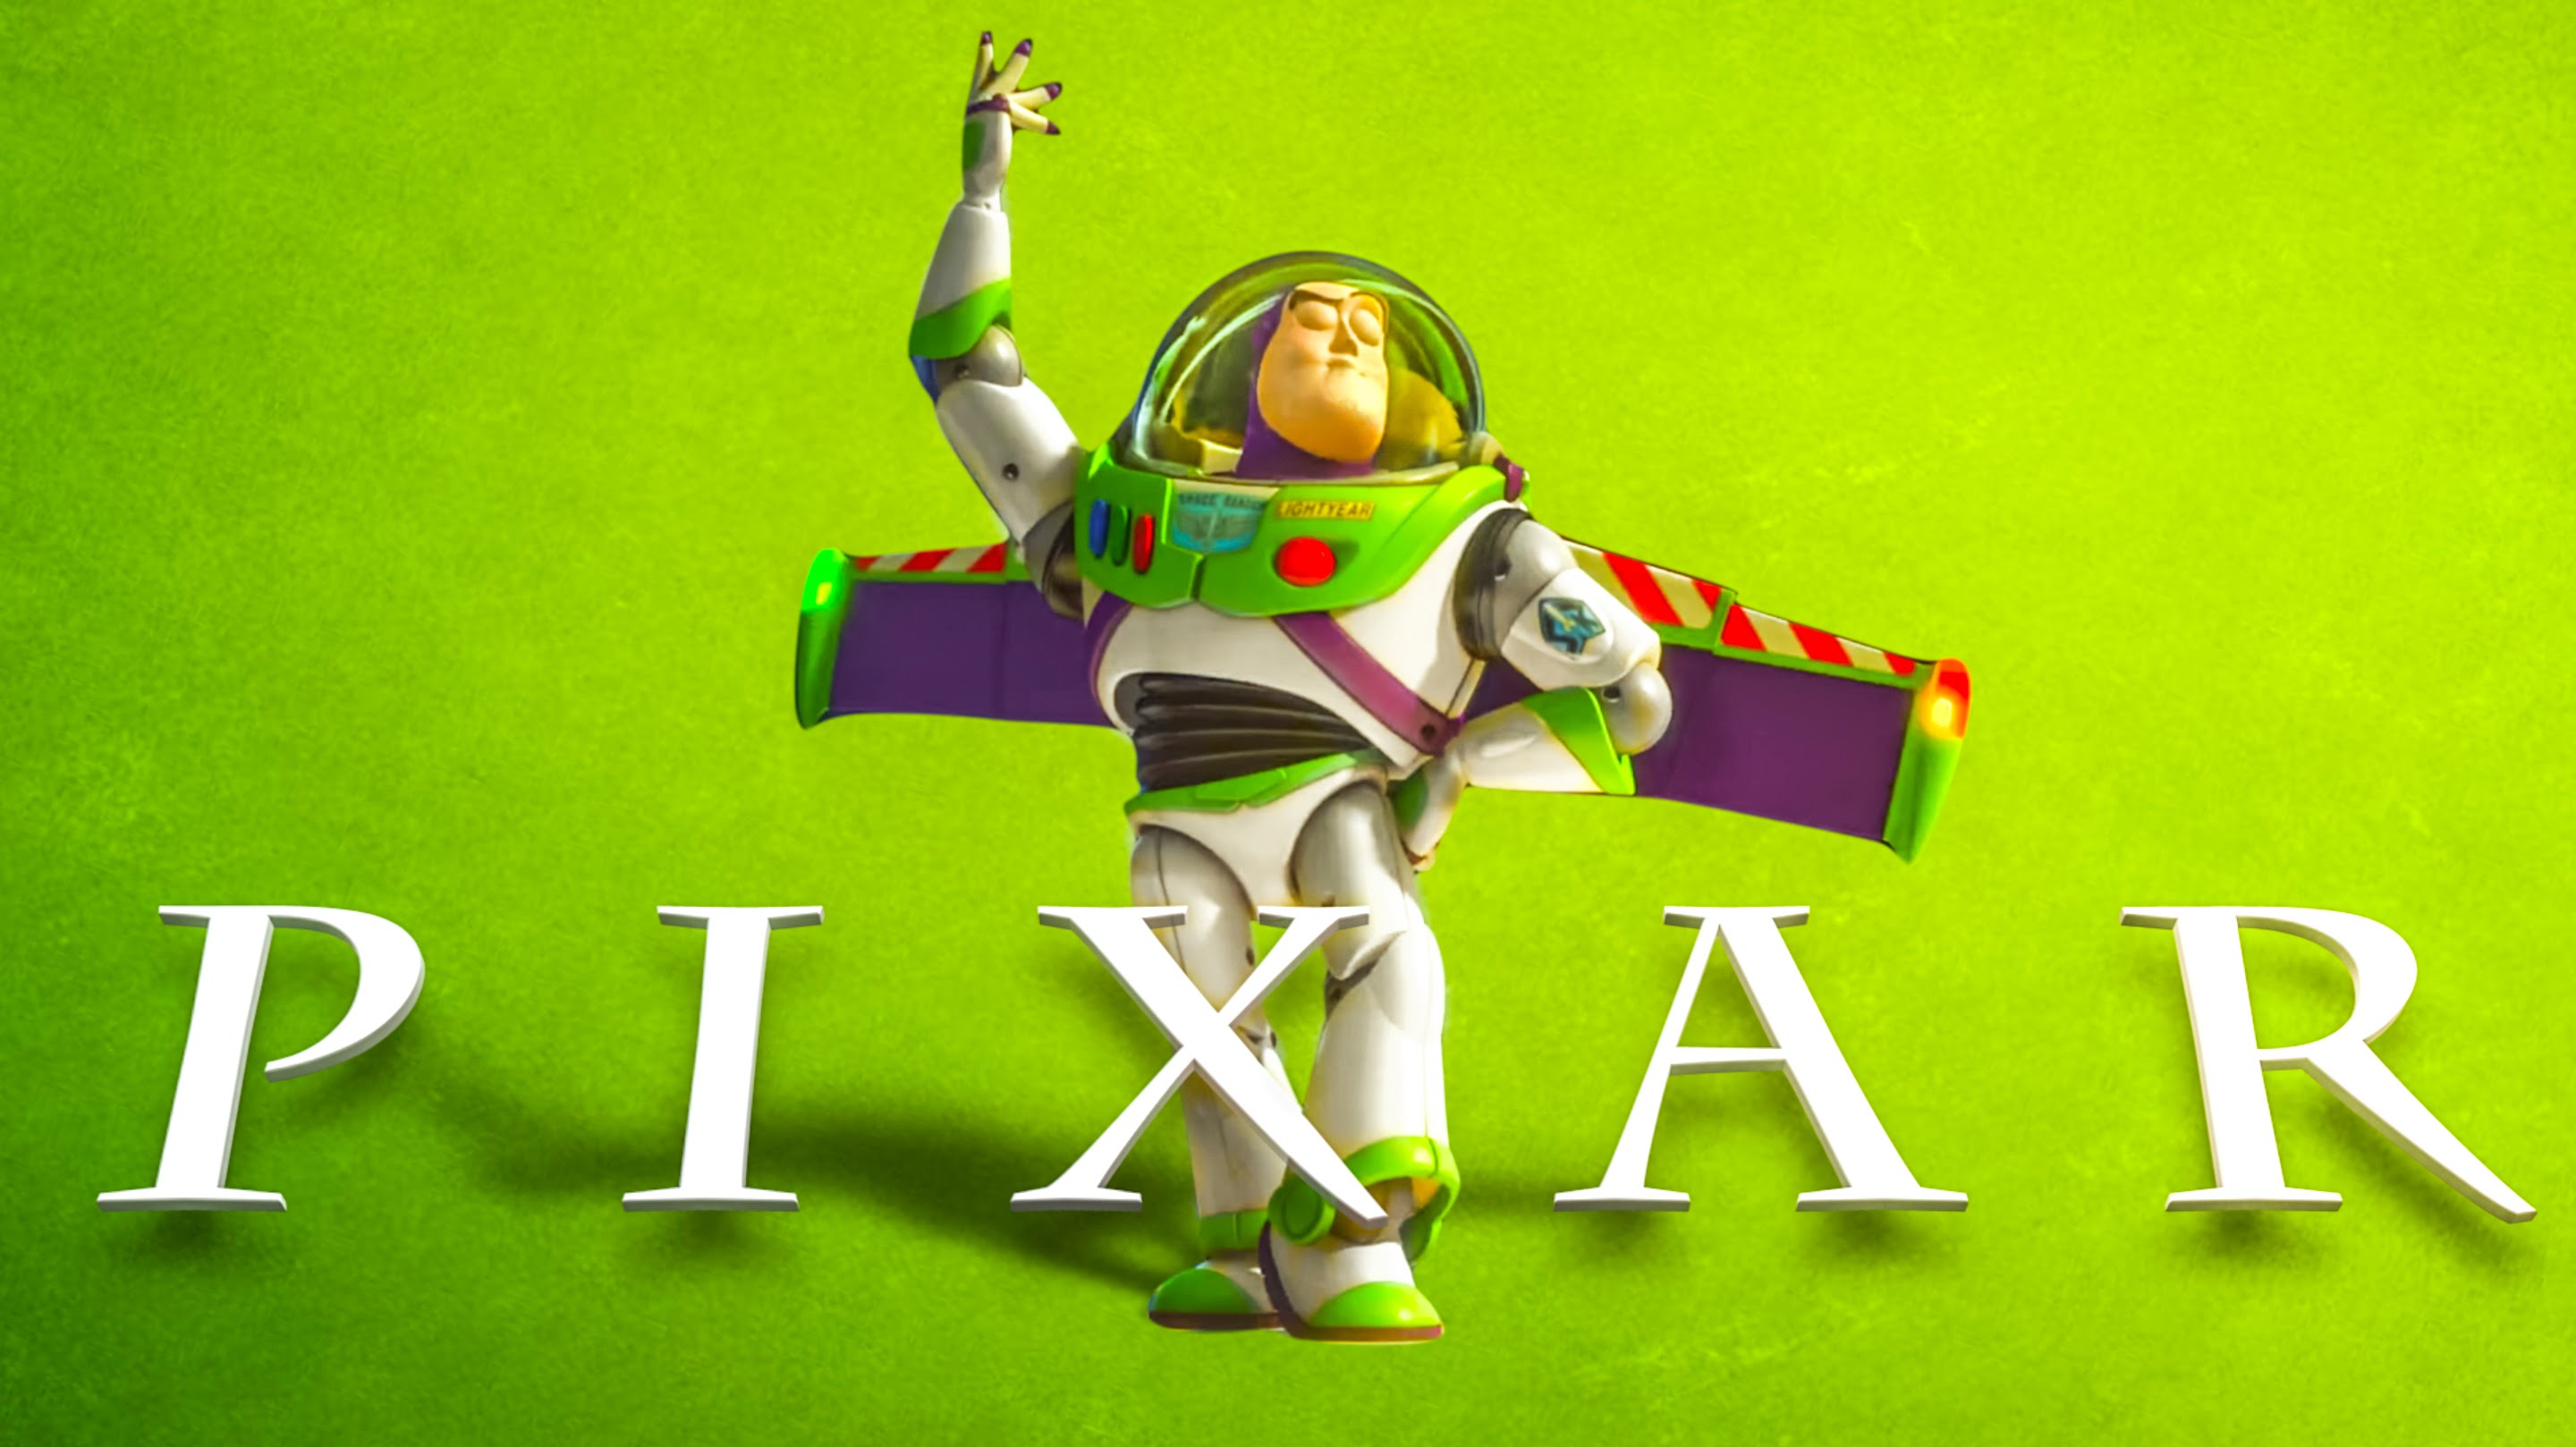 An Animated Explanation of What Makes Pixar Films So Relatable